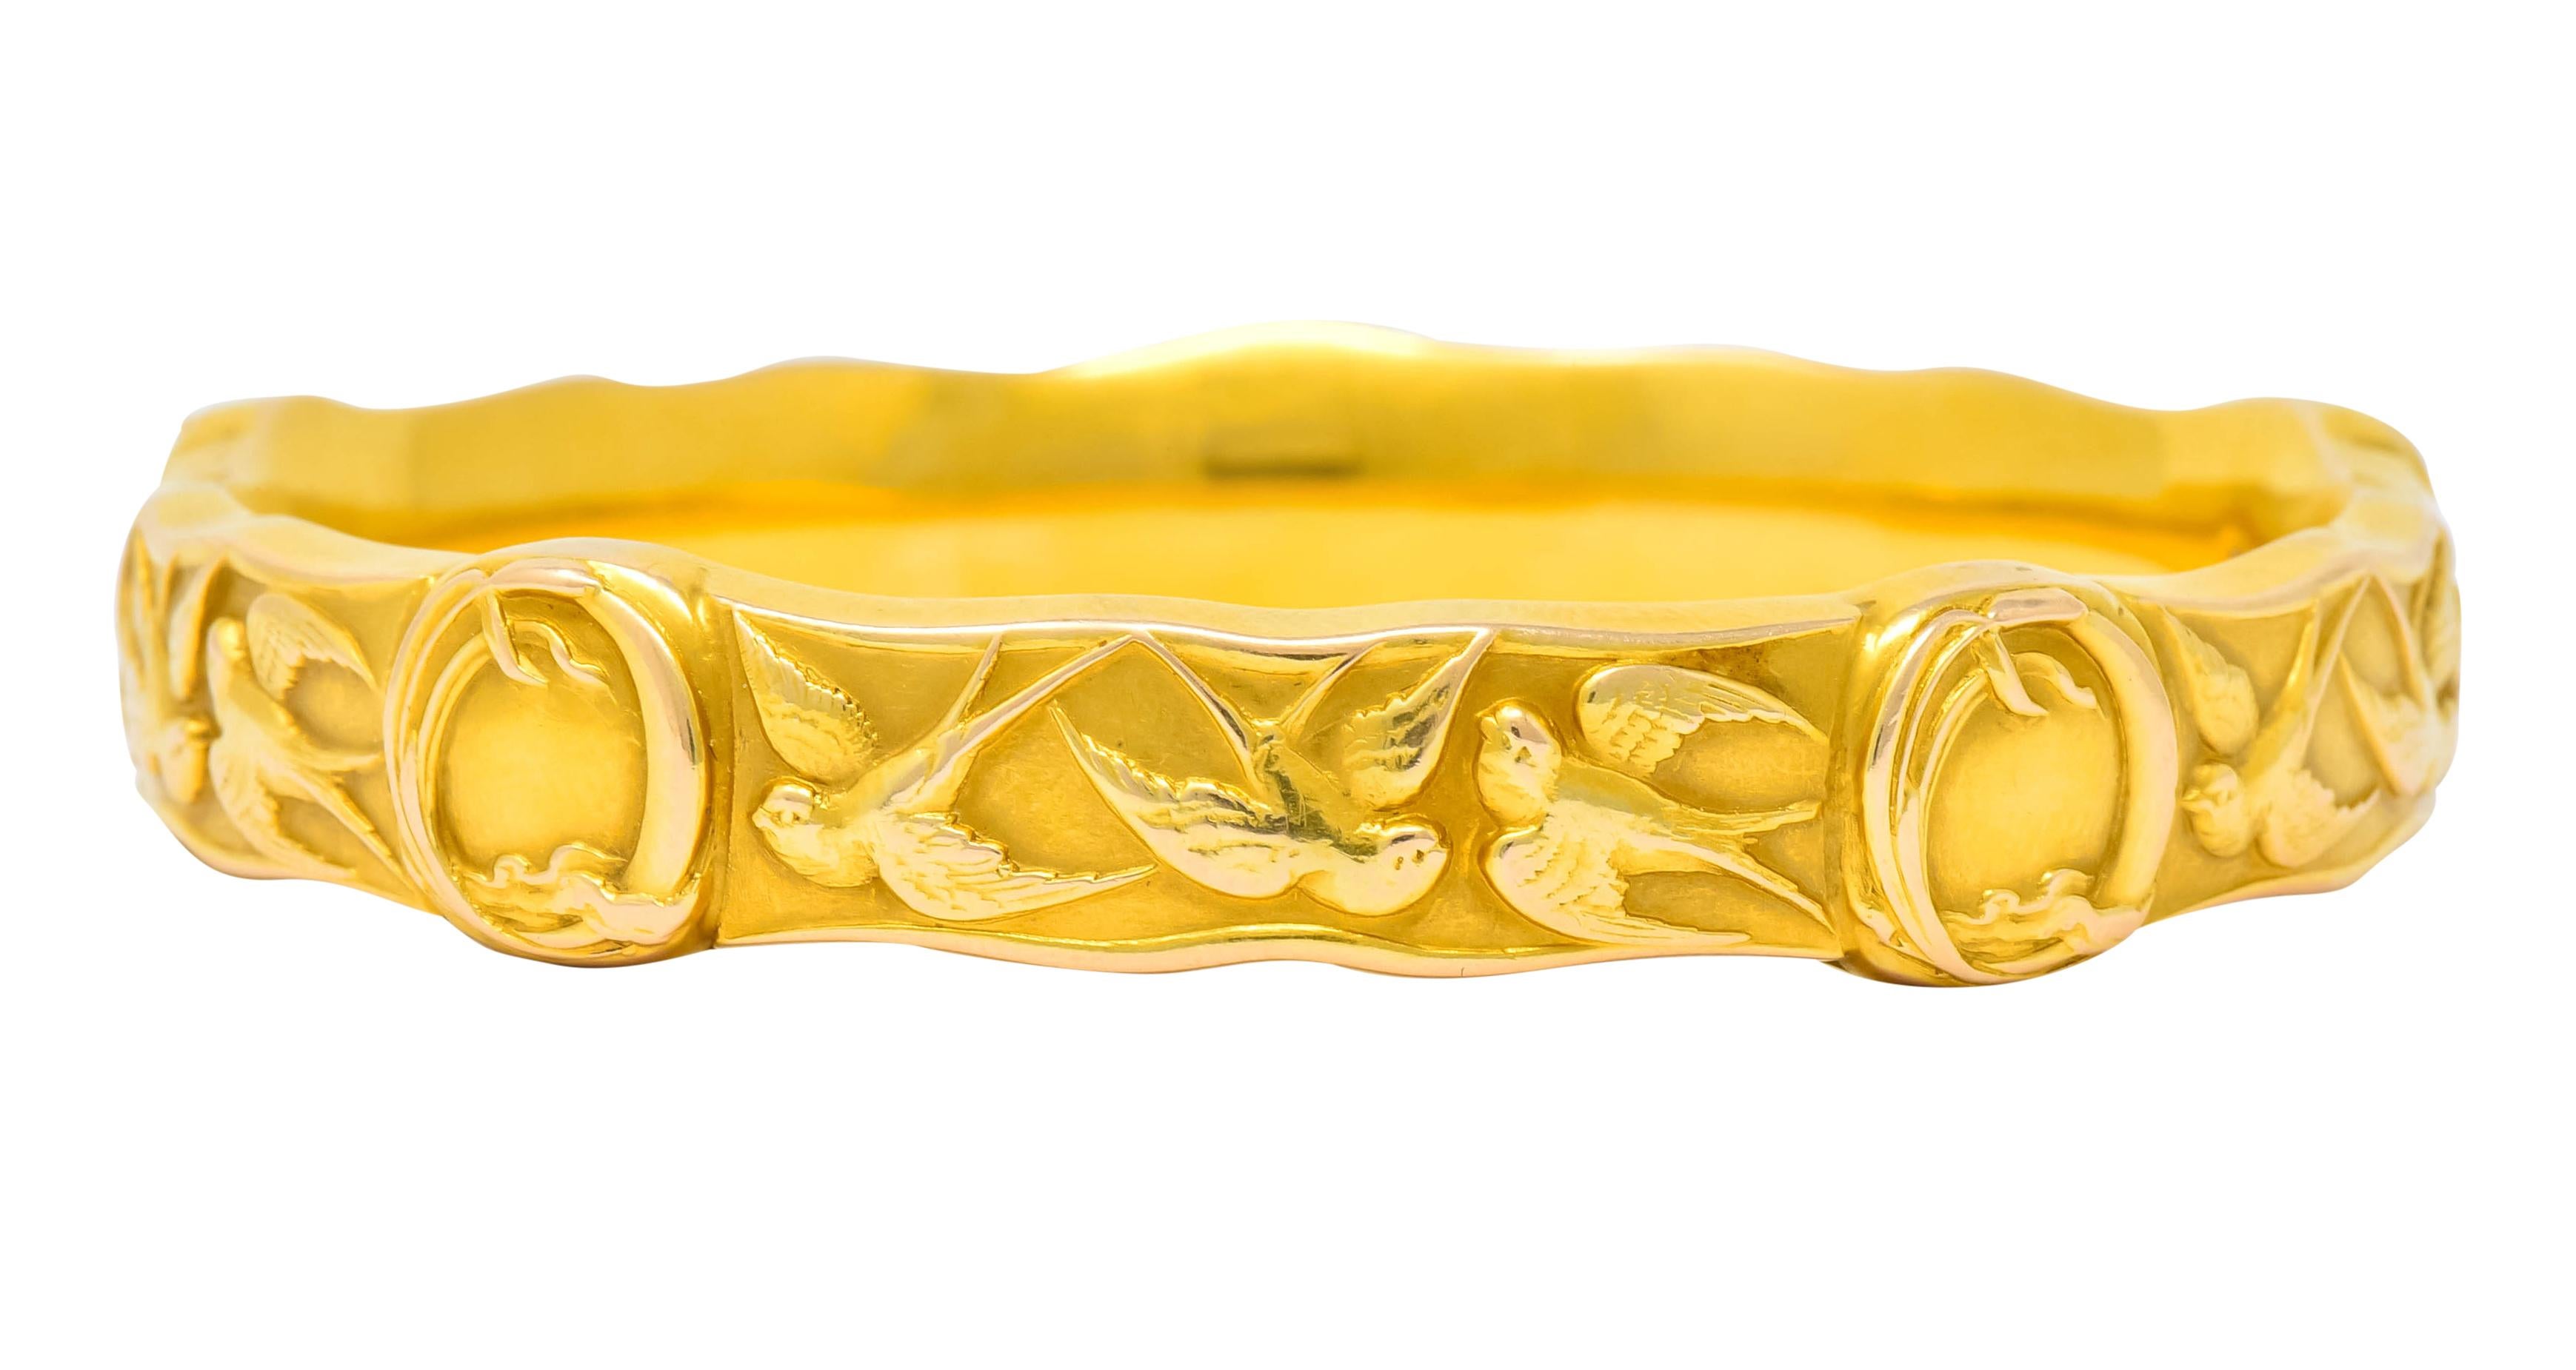 Designed as a wavy edged bangle decorated by highly rendered swallows, mid-flight

Accented by five oval stations framed by whiplash surrounds

Maker’s mark for Riker Brothers and stamped 14k for 14 karat gold

Circa 1900 with dated